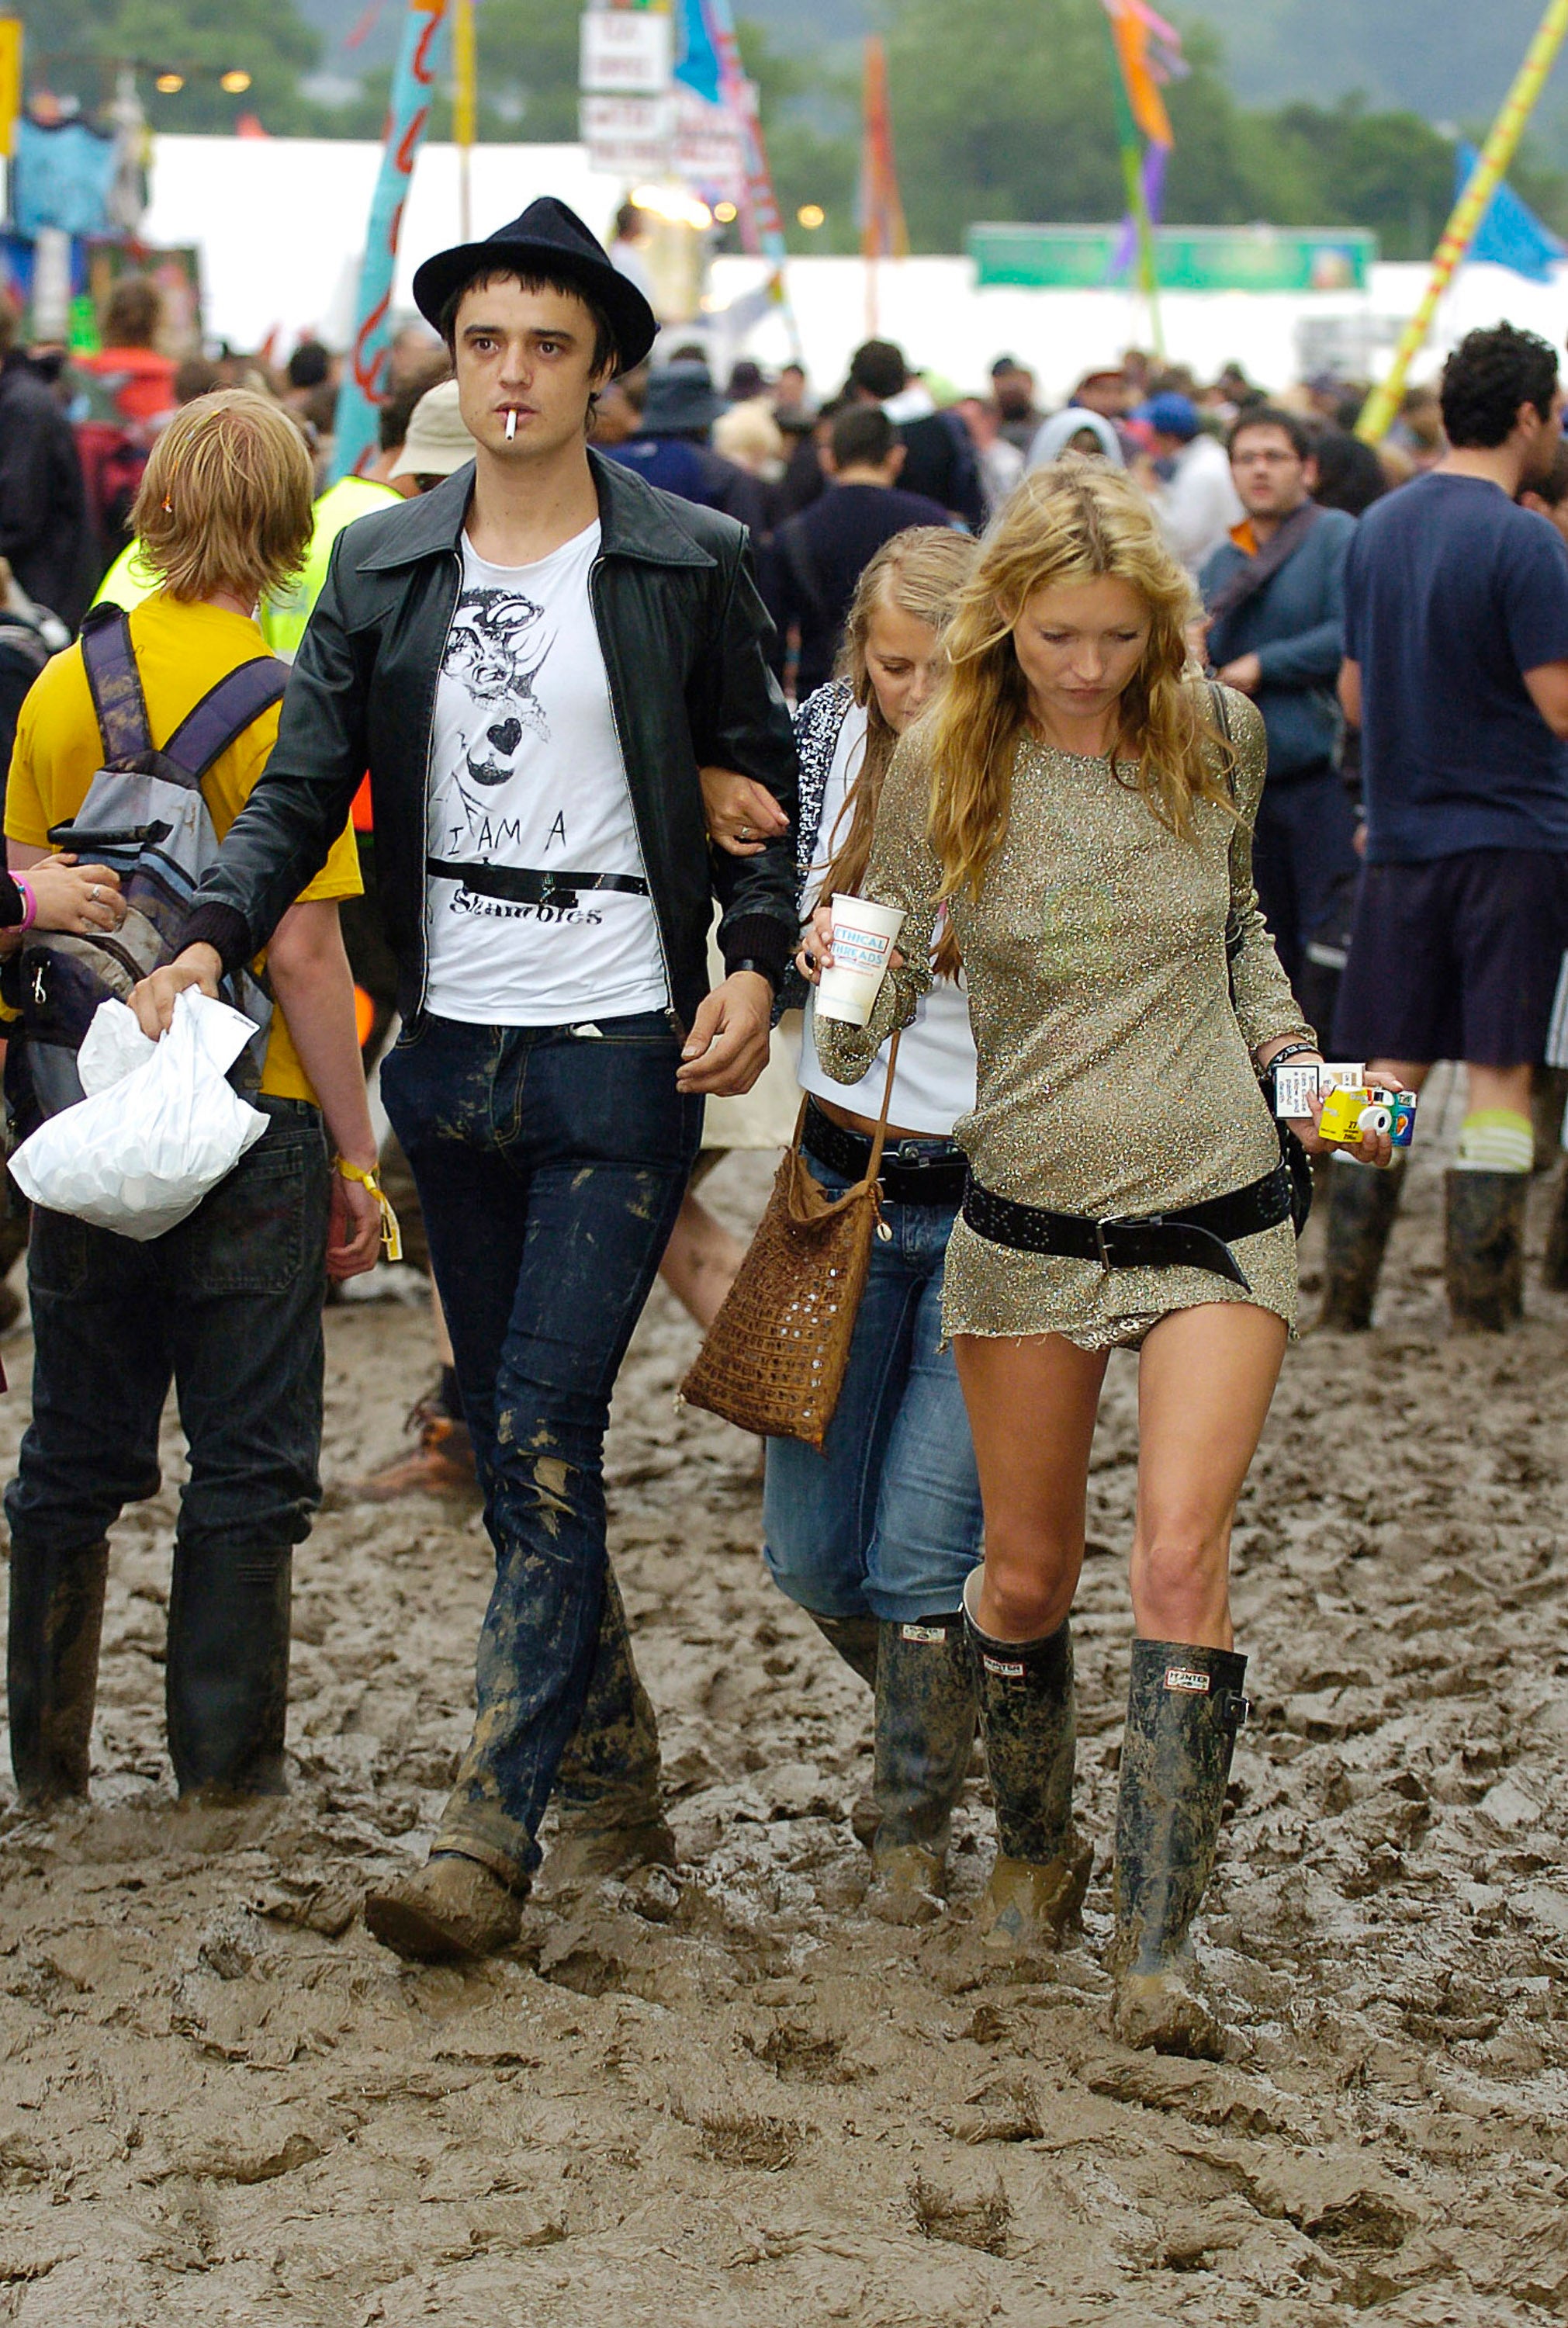 Pete Doherty of The Libertines and model Kate Moss braving the mud in 2005